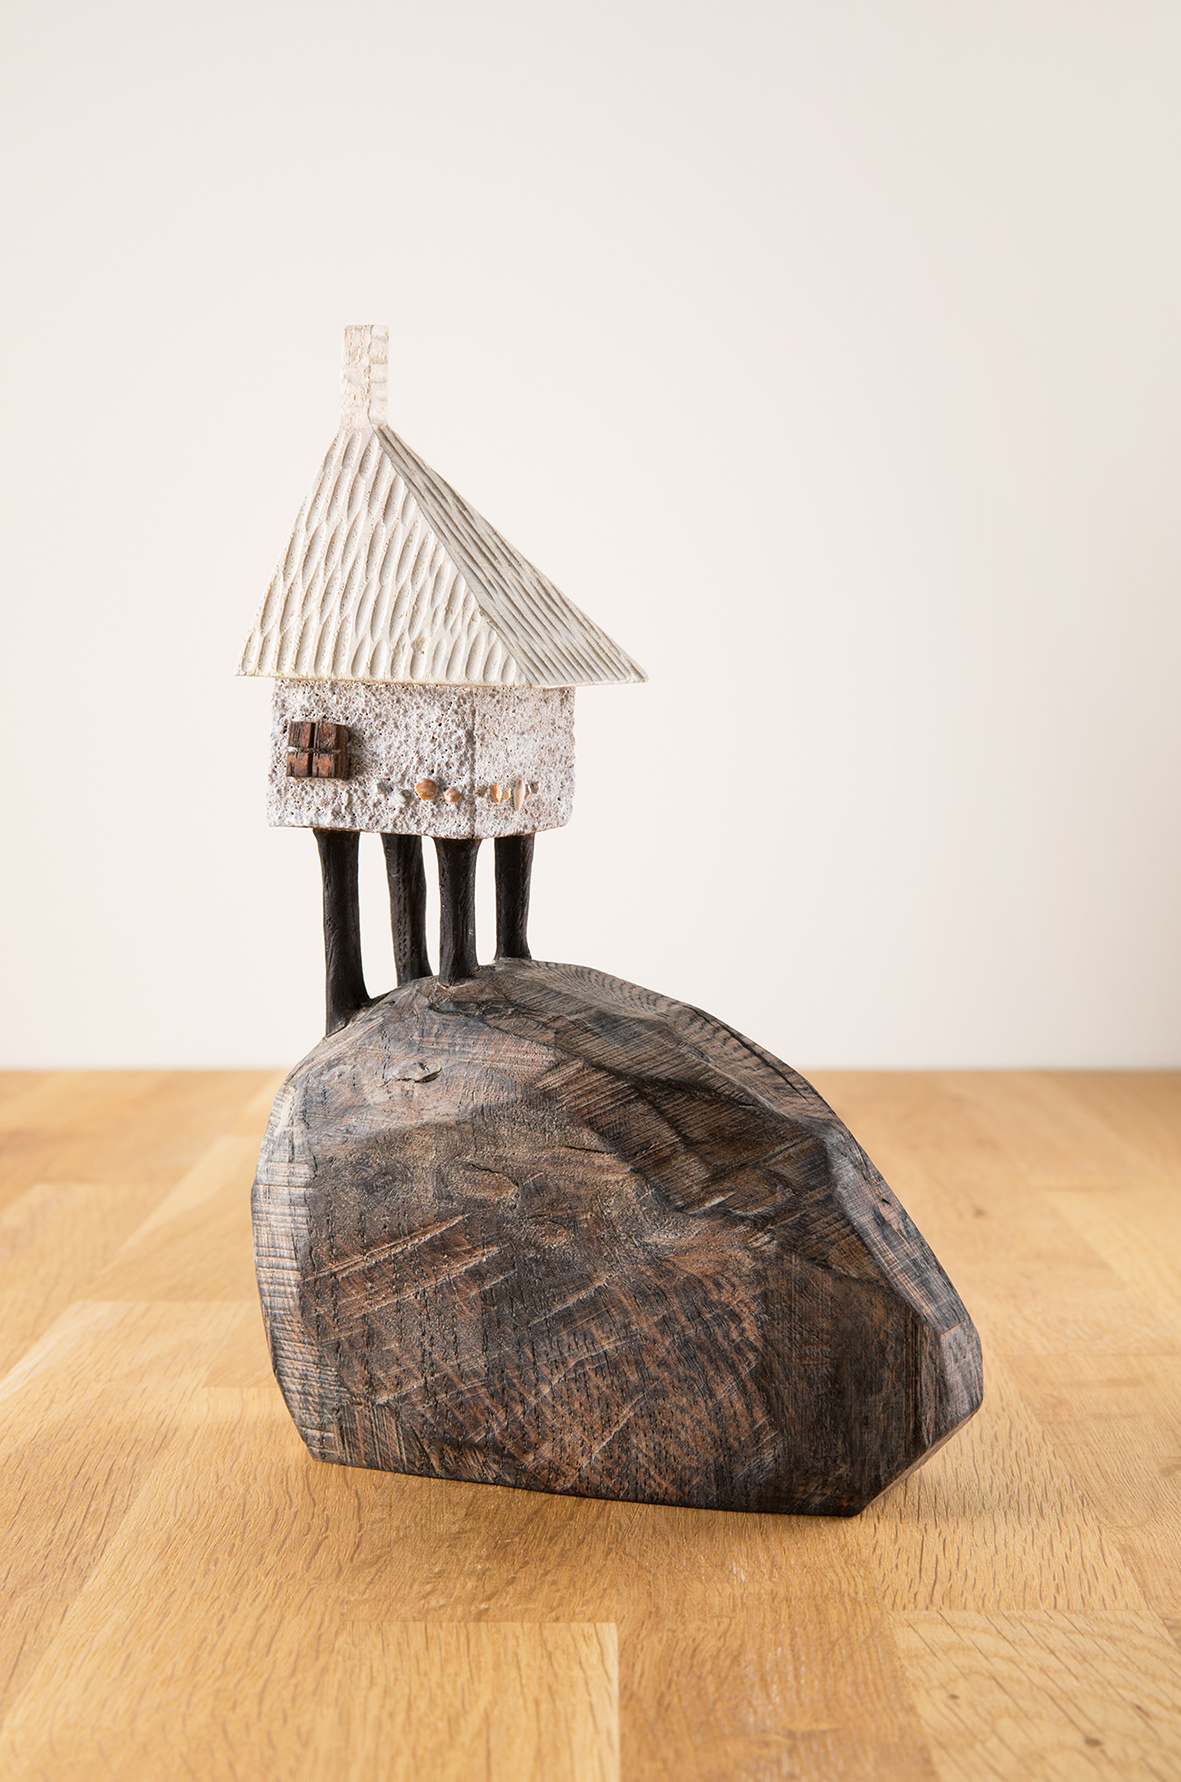 A miniature carved wooden house on top of a carved wooden mound